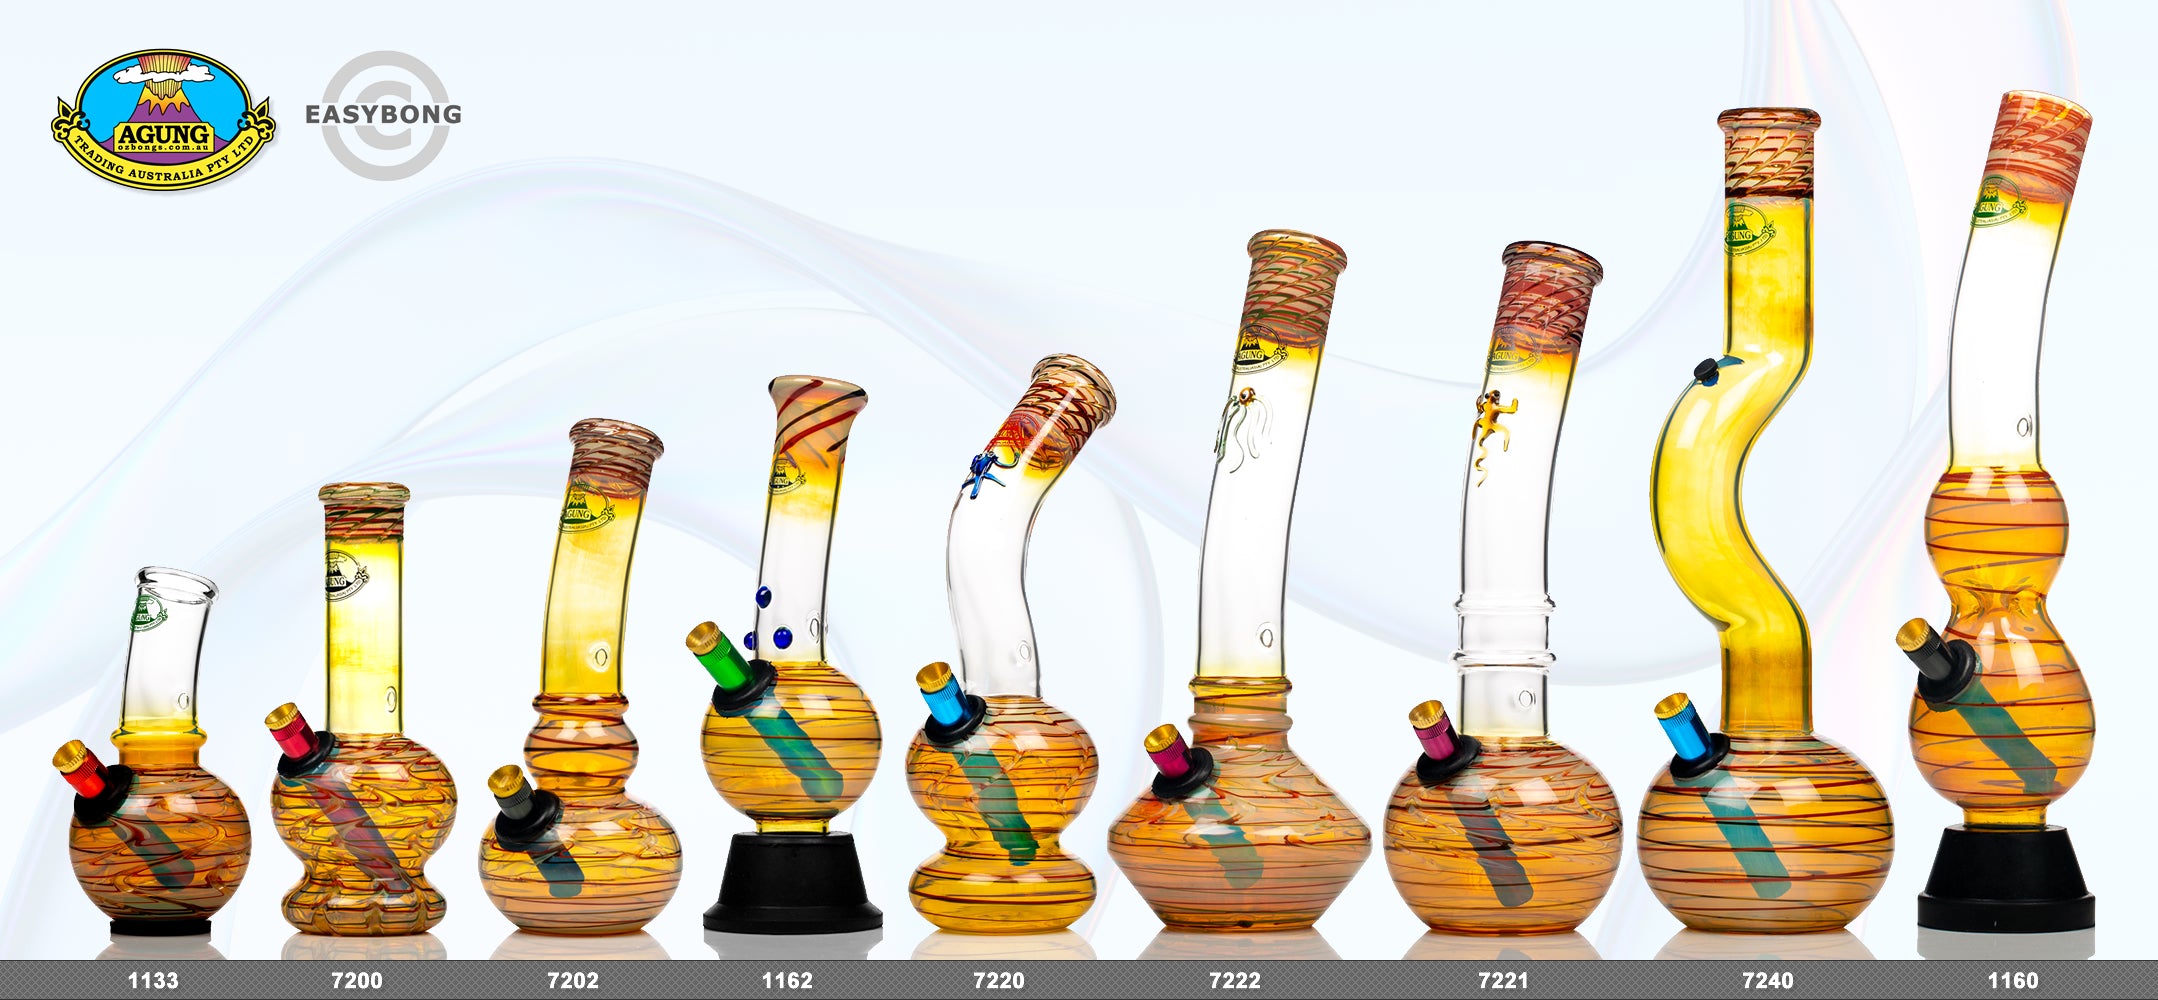 Side by side showing size difference of Australian Agung glass bongs.